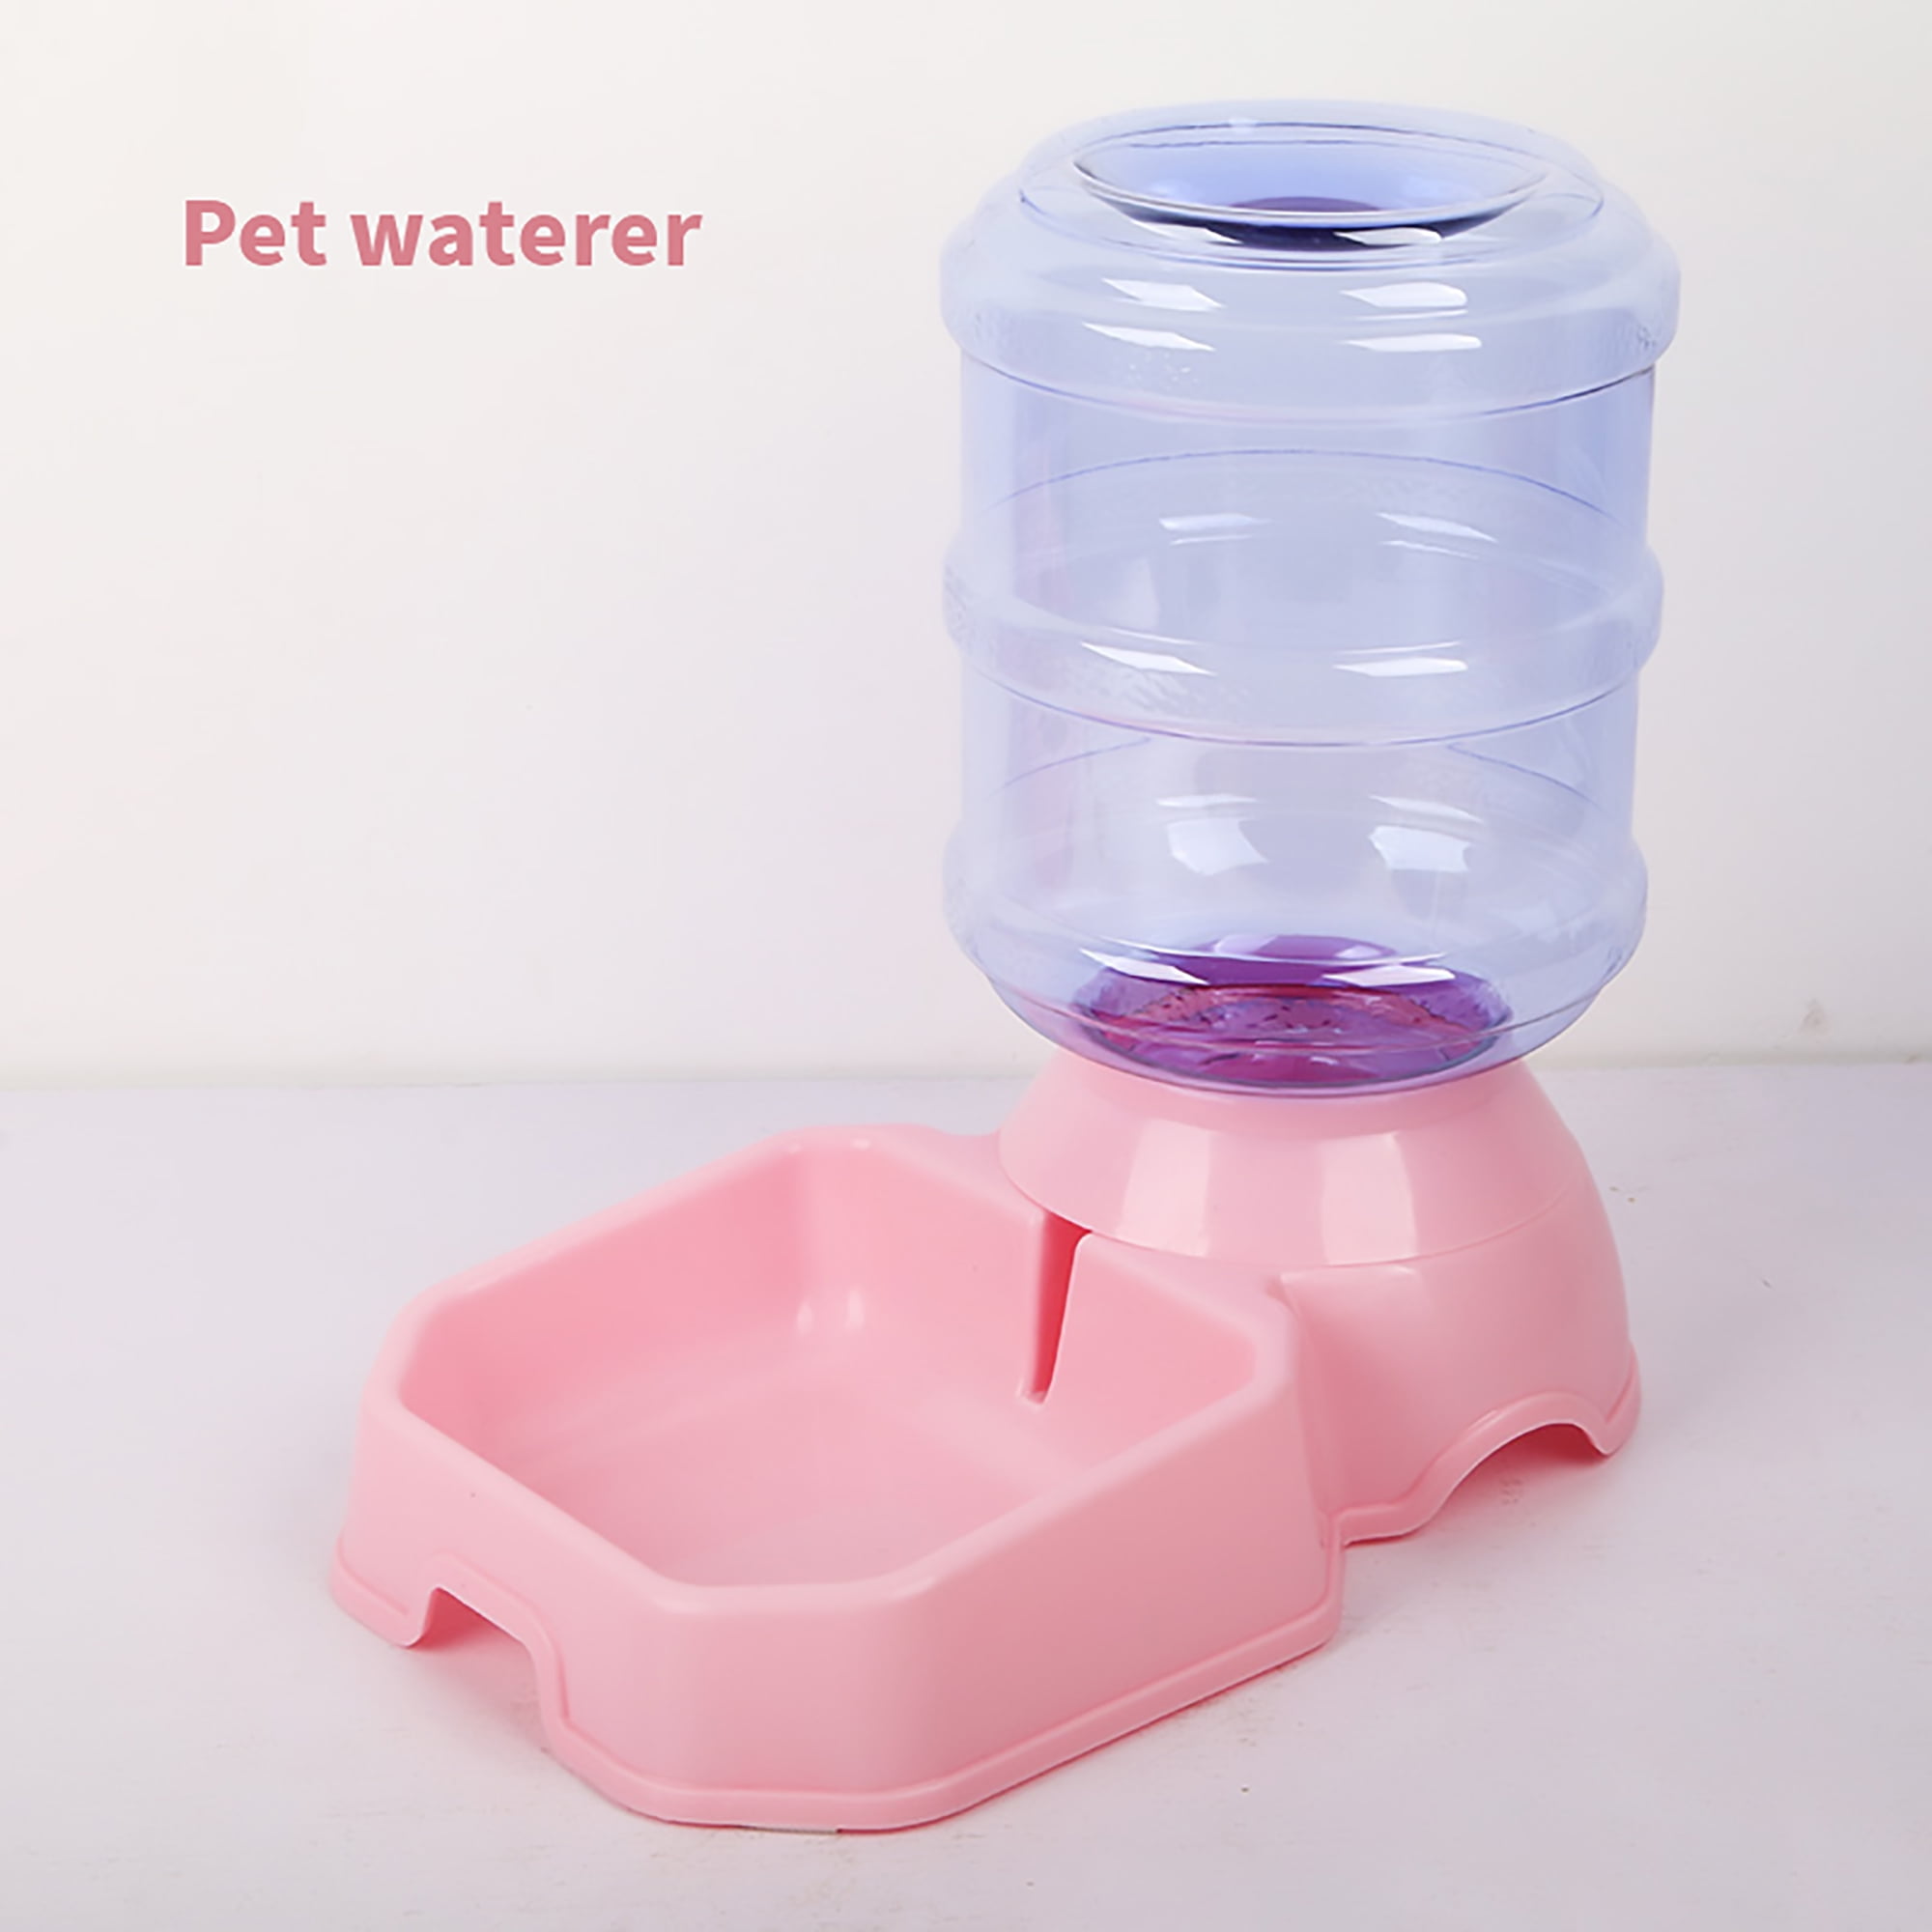 Pink Portable Dog Water Bottle and Feeder – Cats&Dogs